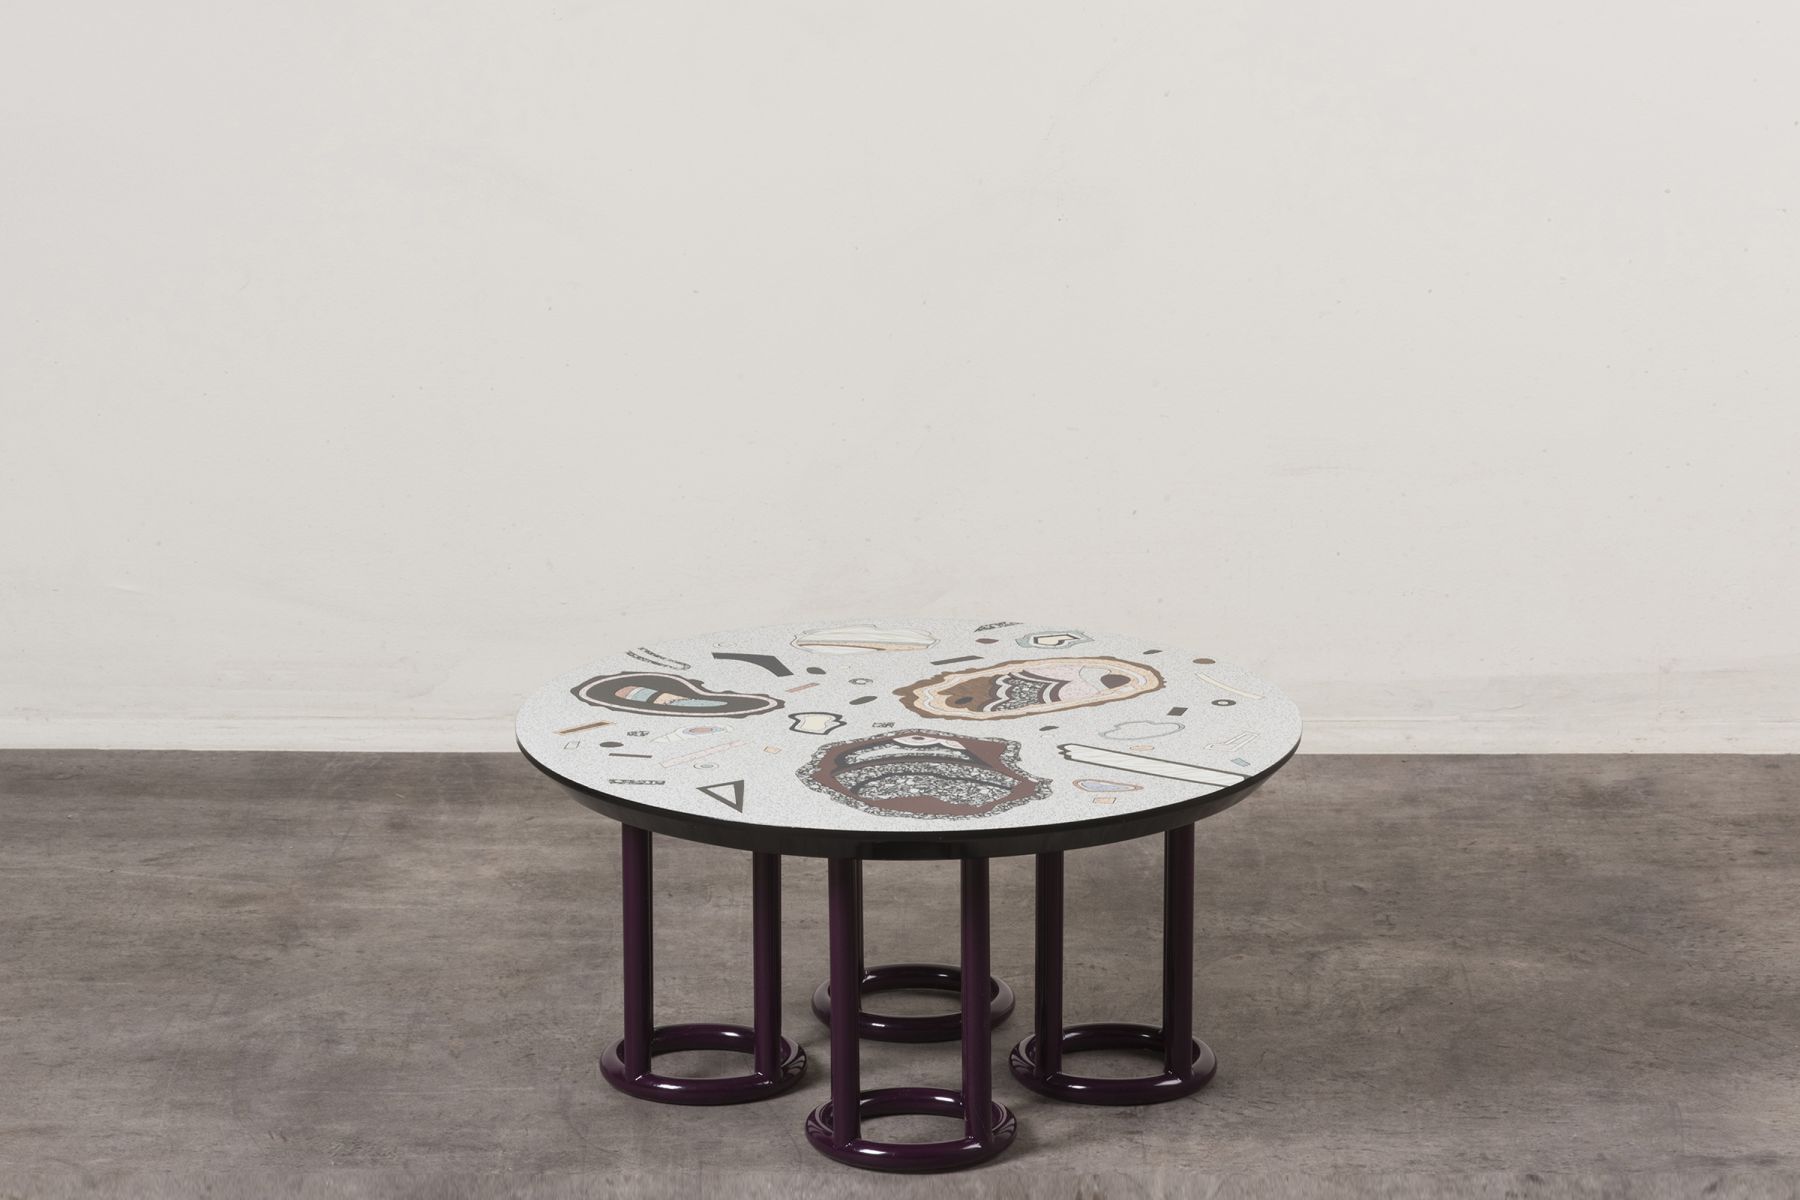 Low table 'Hot Rock' Bethan Laura Wood pic-1